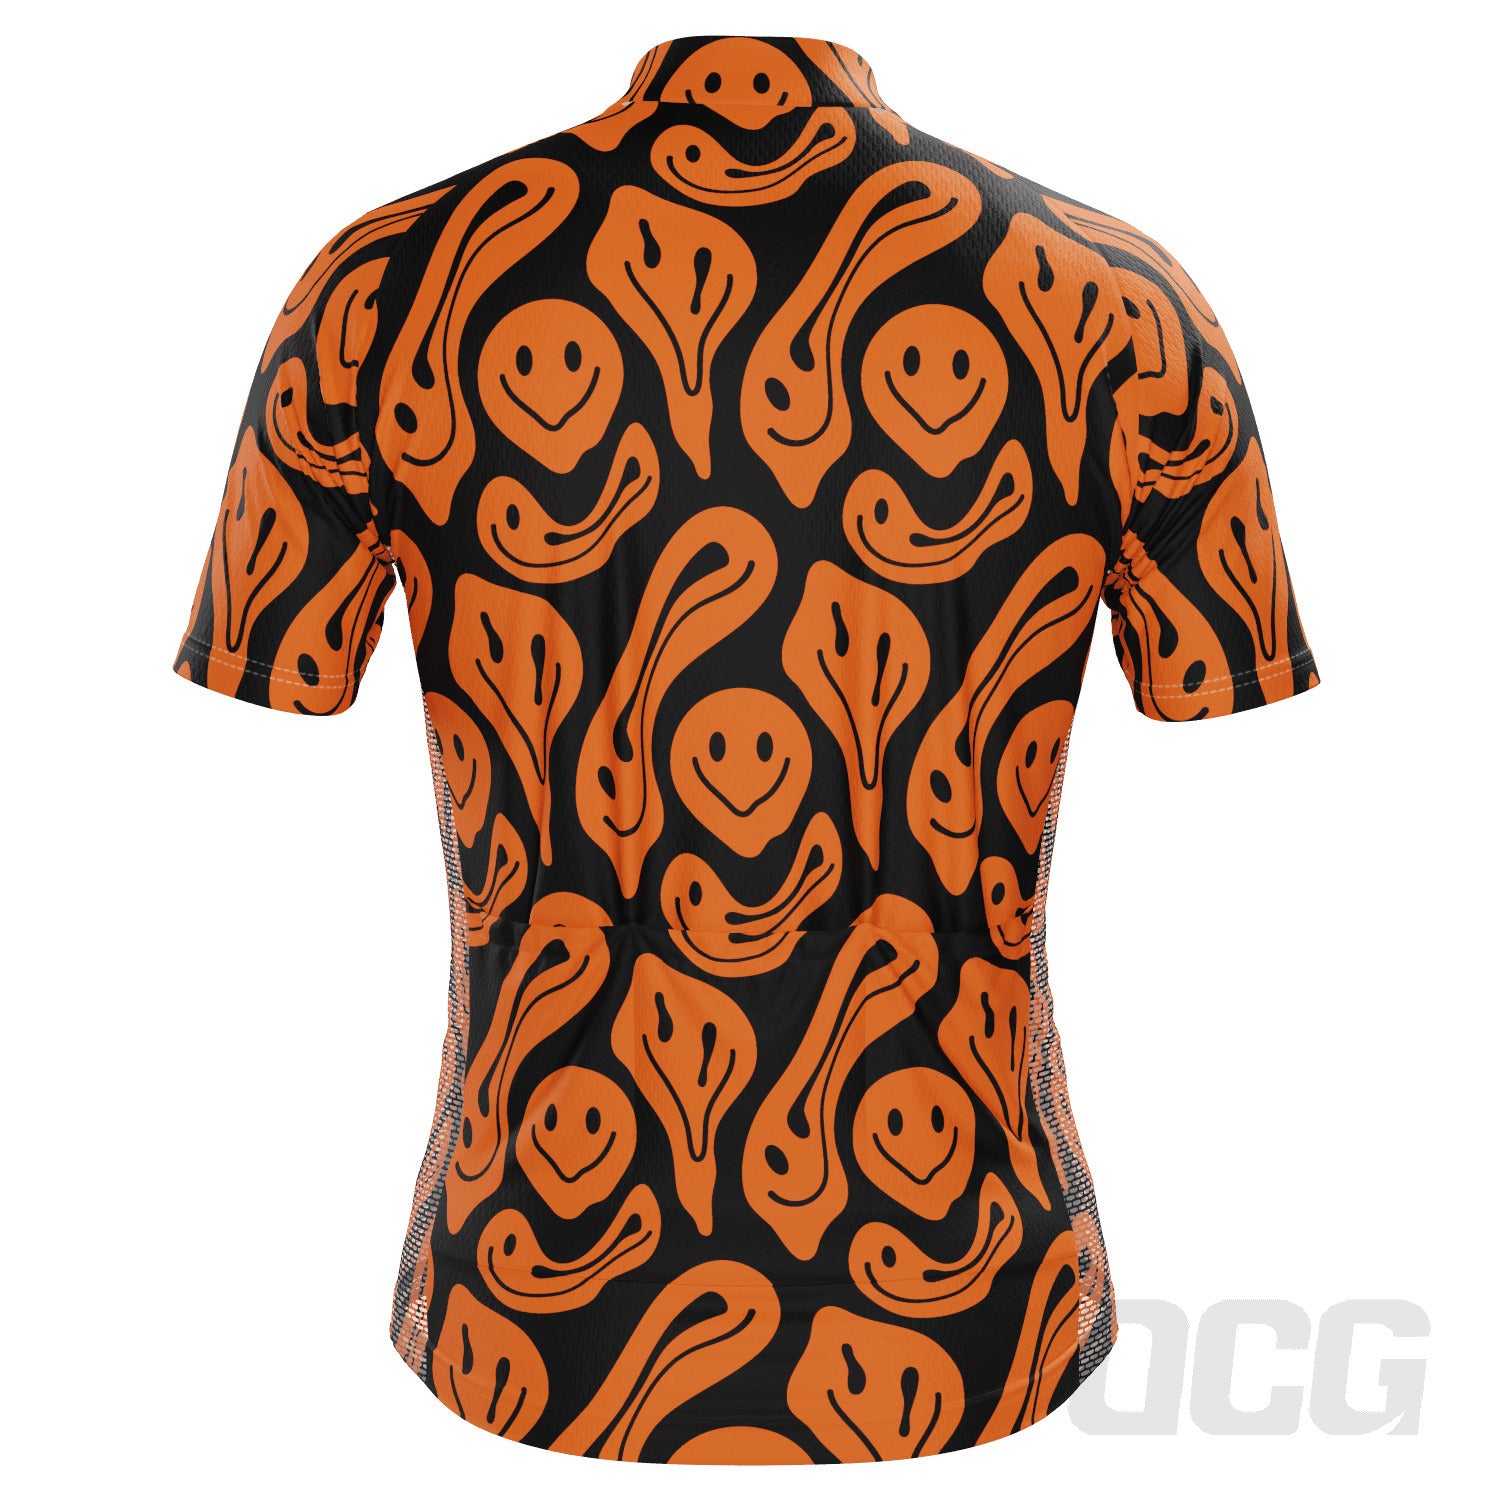 Men's Psychedelic Ghosts Short Sleeve Cycling Jersey